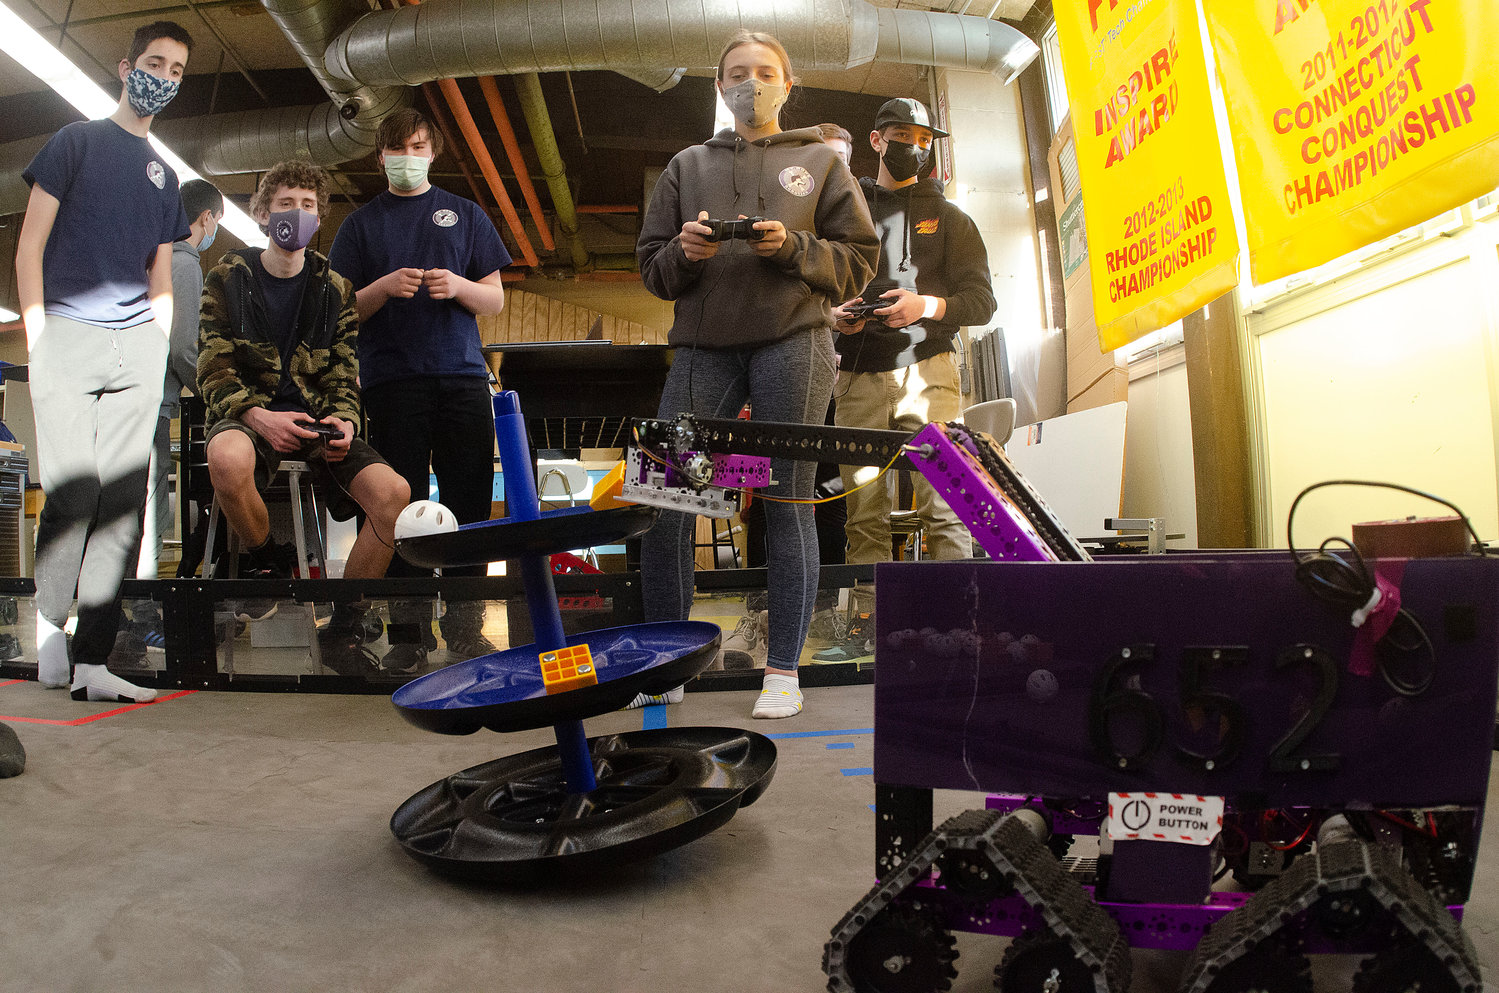 Samuel Howard (left, seated) and Alice Grantham practice with their team's robots in the arena.